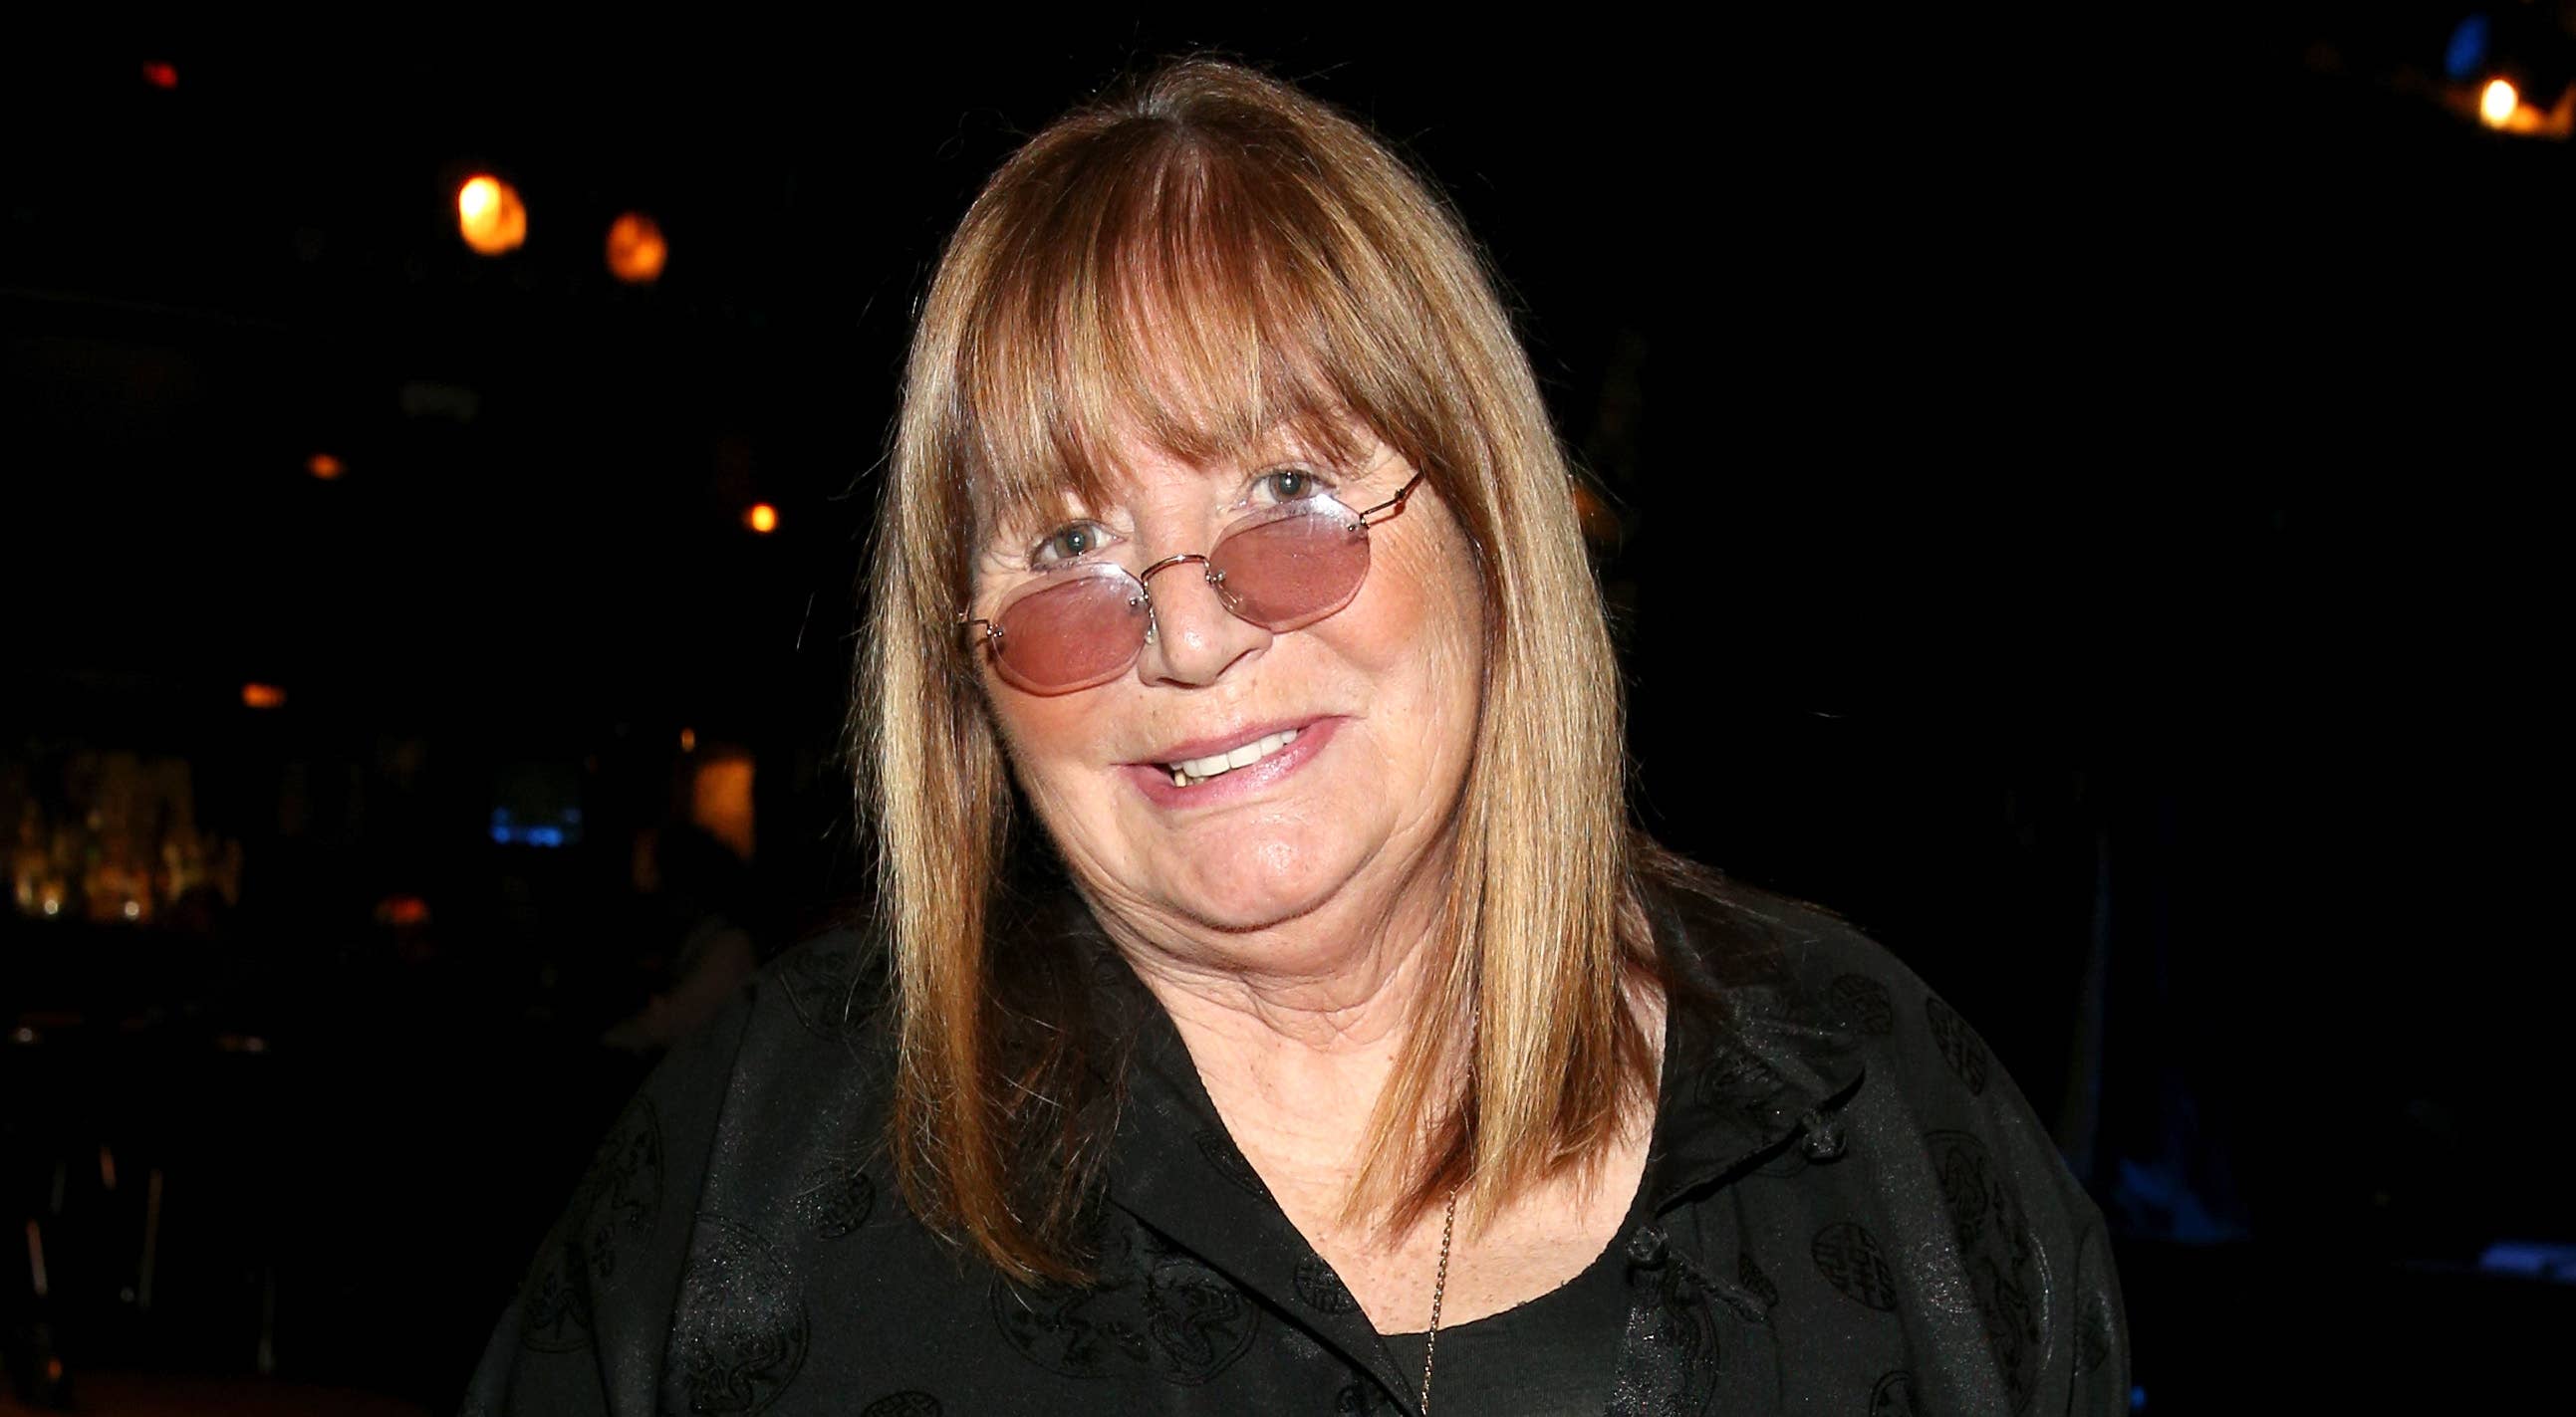 Penny Marshall attends the celebration of black cinema hosted by Broadcast Film Critics Association